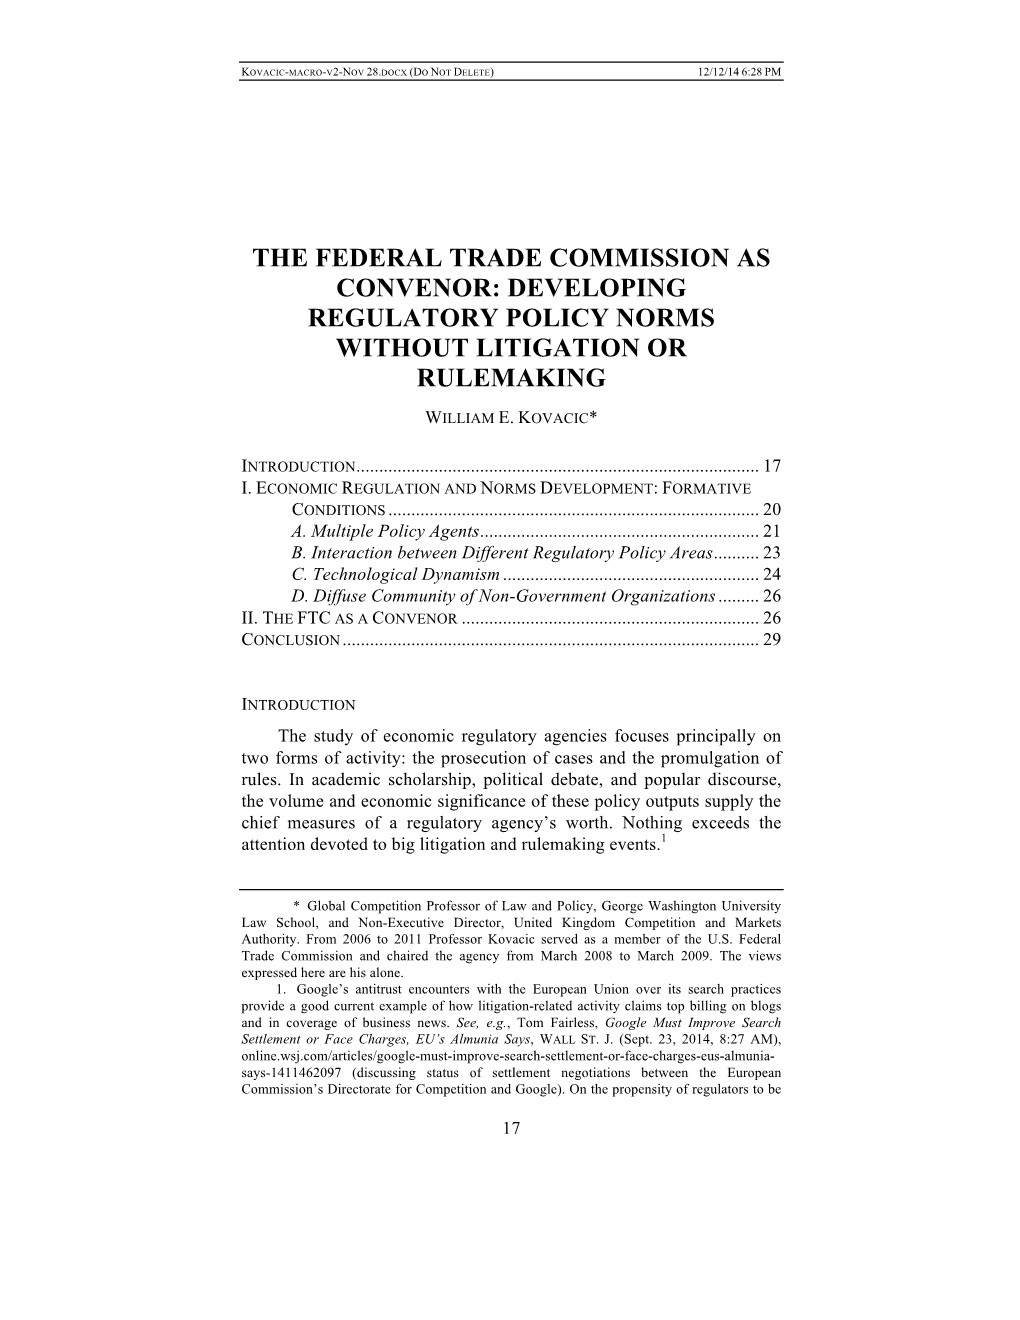 The Federal Trade Commission As Convenor: Developing Regulatory Policy Norms Without Litigation Or Rulemaking